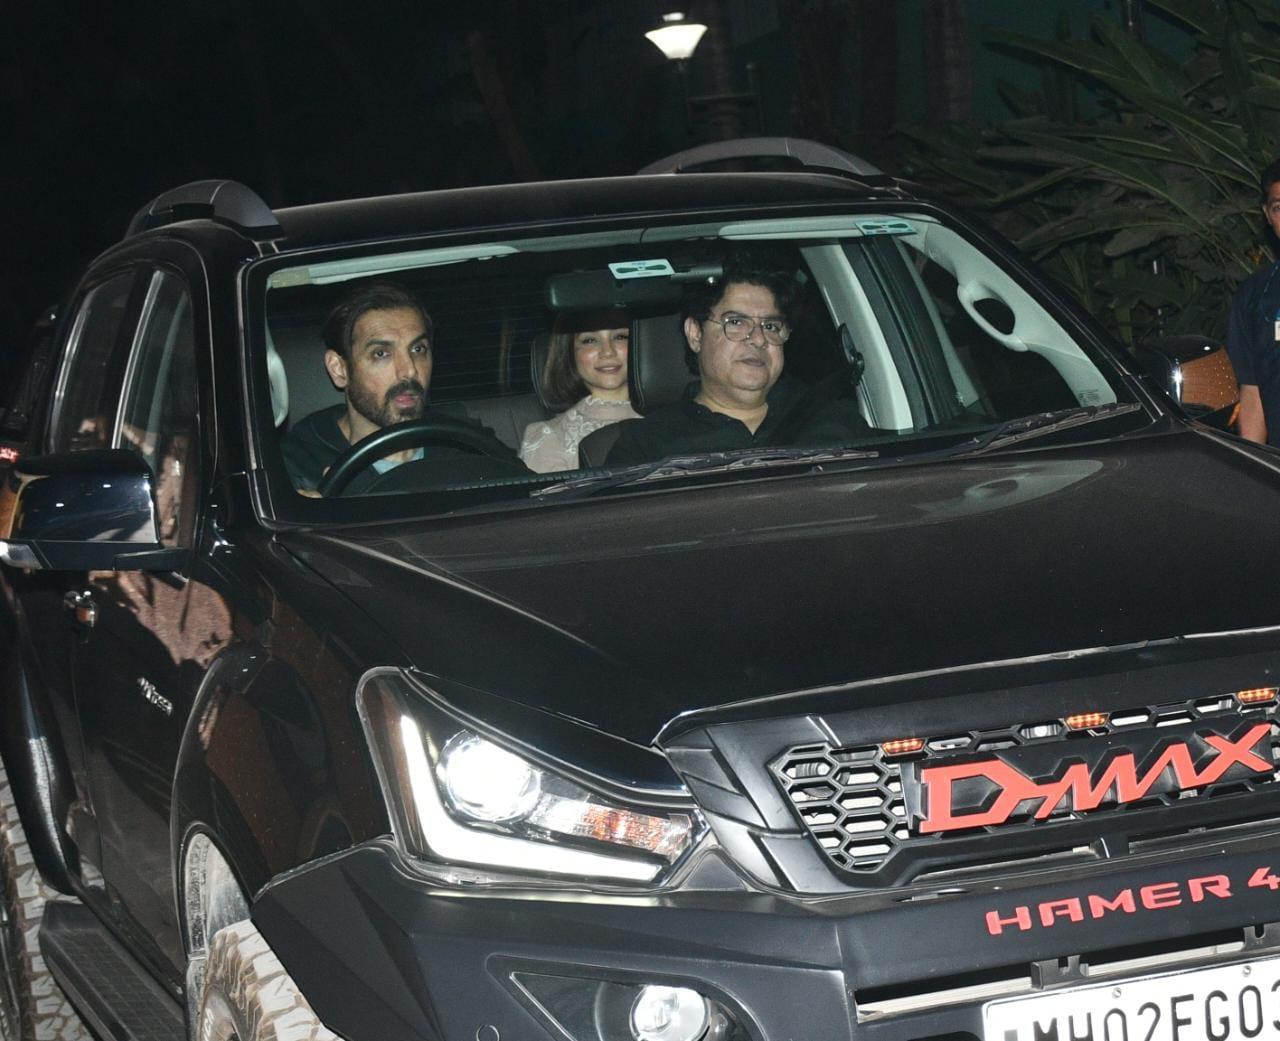 John Abraham, who plays the antagonist in the film, was seen arriving for the screening along with Sajid Khan. The filmmaker recently stepped out of the Bigg Boss 16 house after his minimum guarantee expired